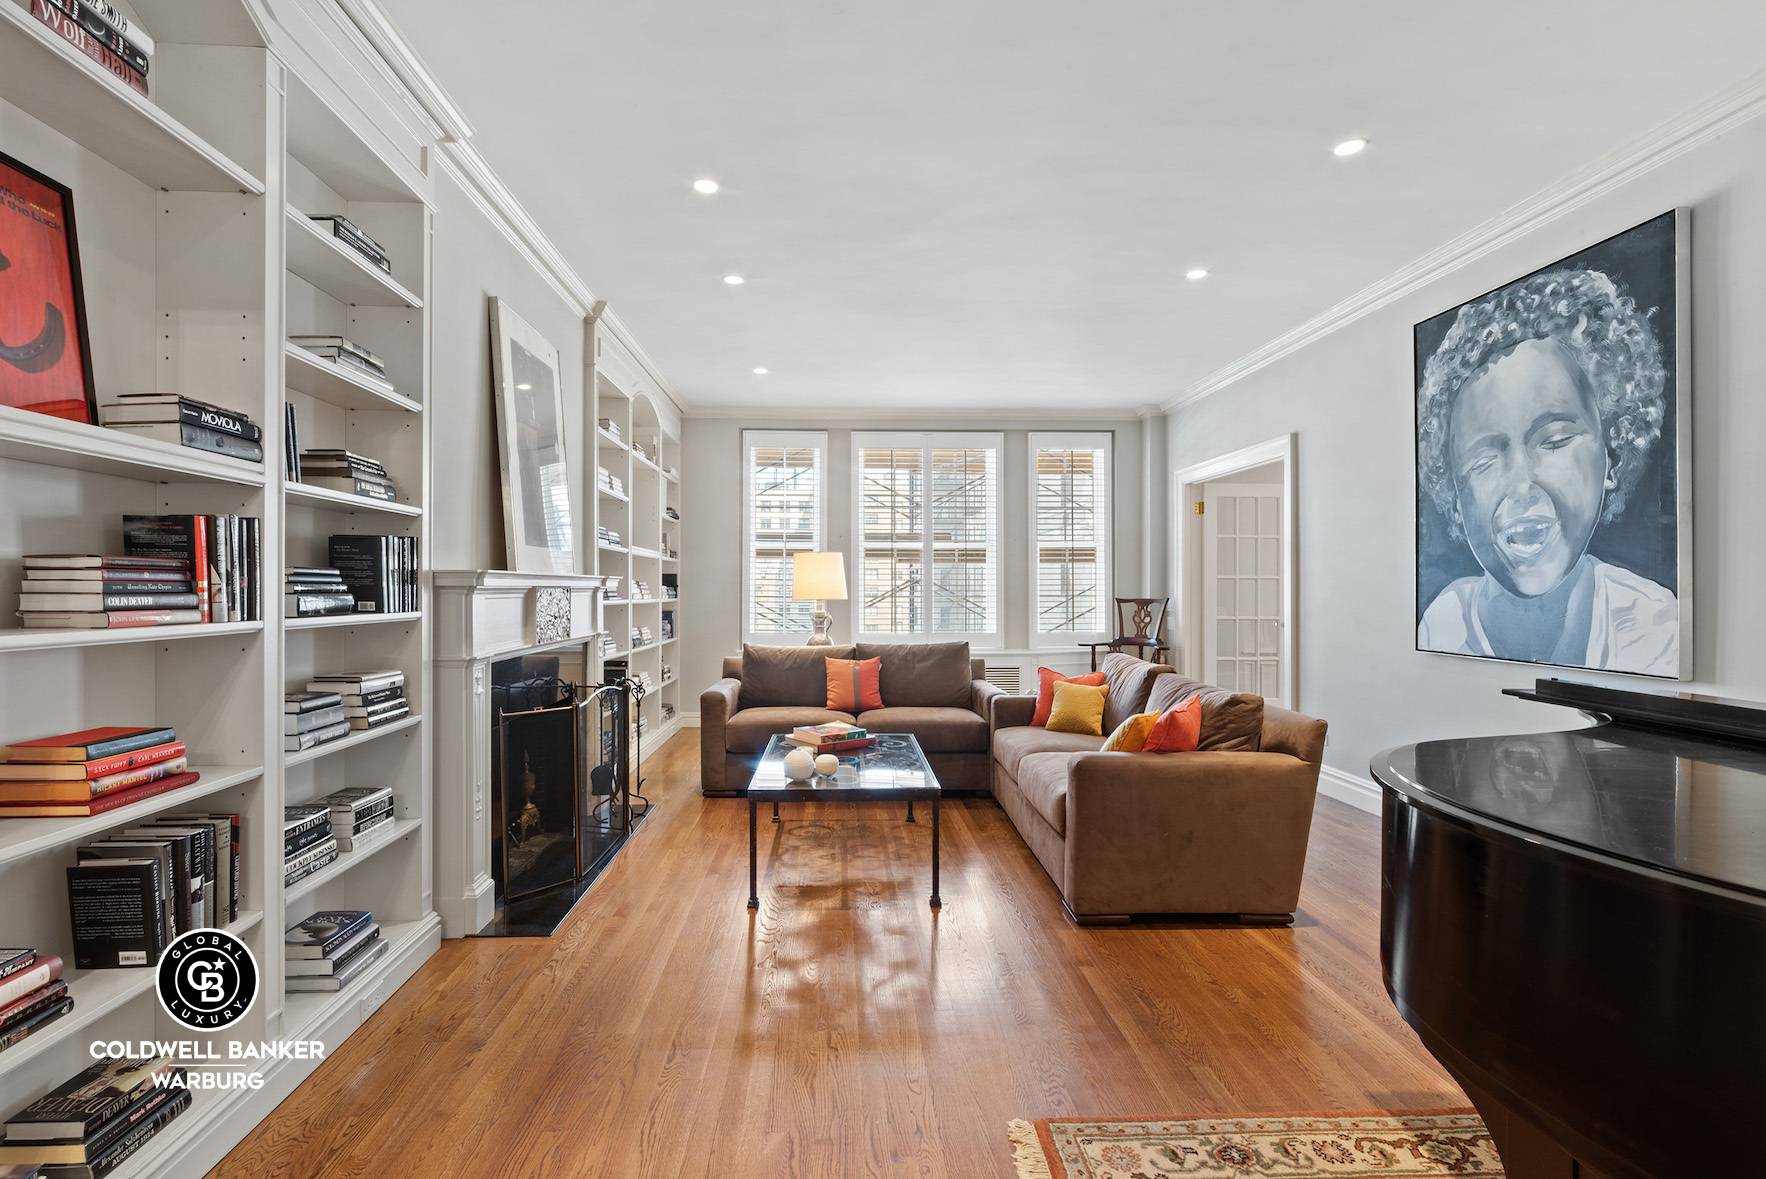 Apartment 9B at 570 Park Avenue presents a rare opportunity to own a beautiful, gracious home in a most sought after Park Avenue co op in the East 60s.